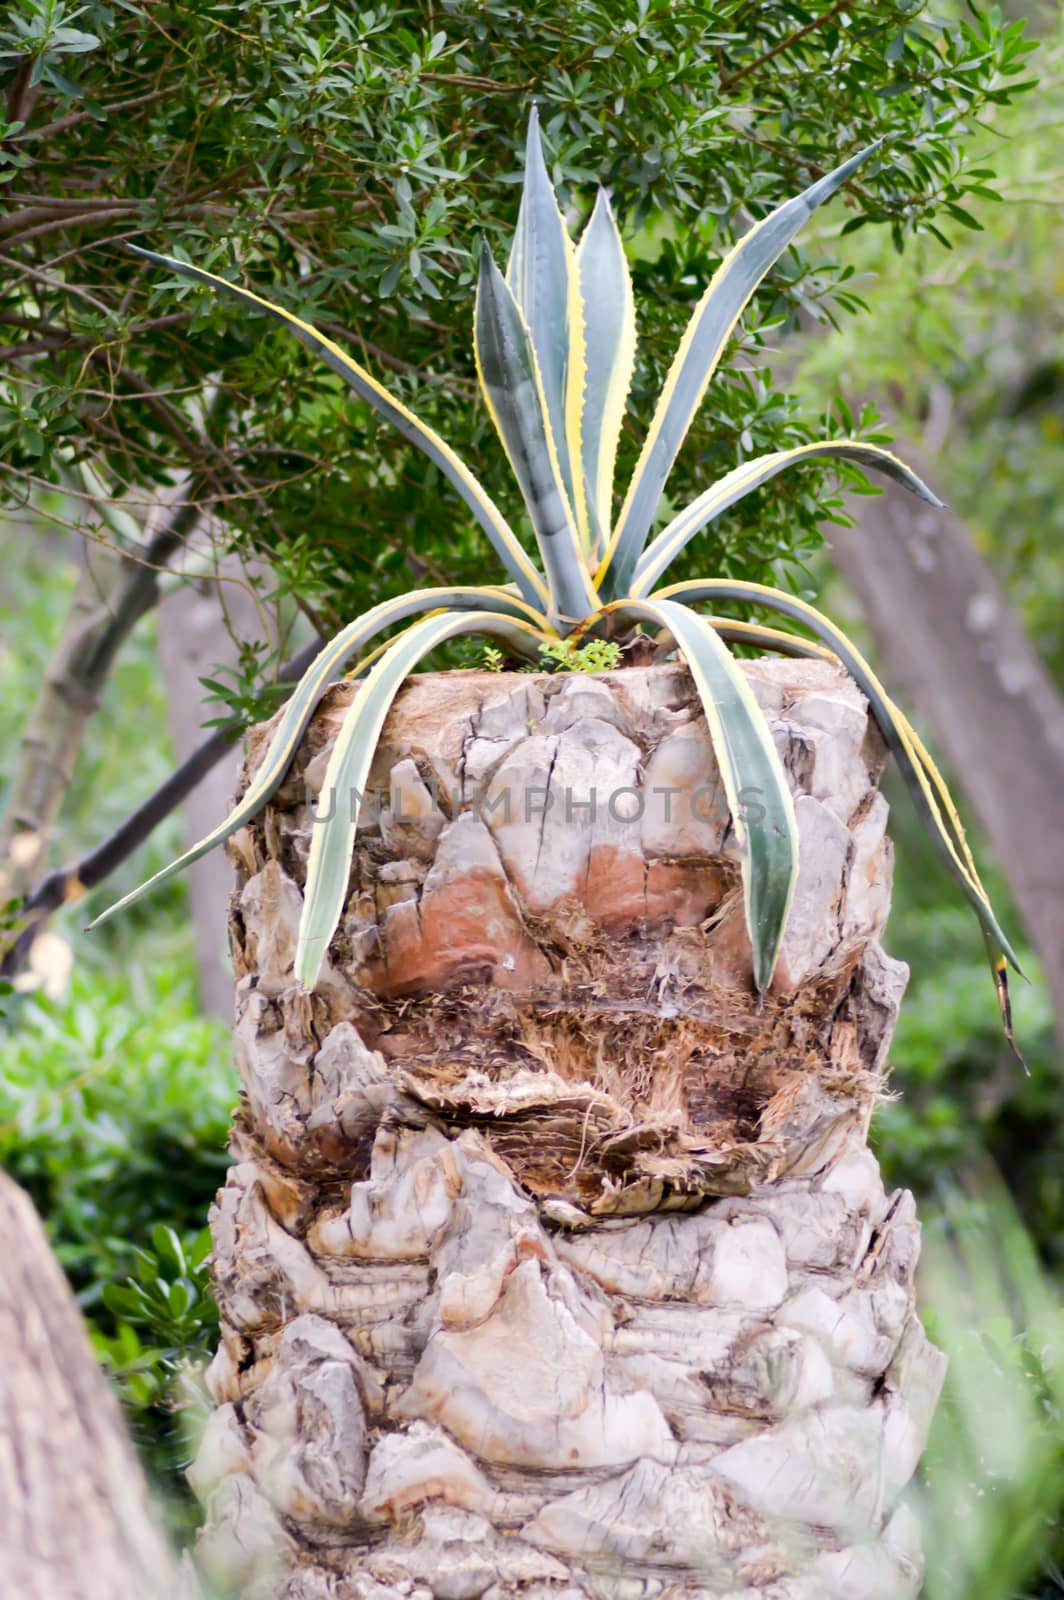 Cactus that grows on an old trunk of palm tree in a garden of the island of Crete